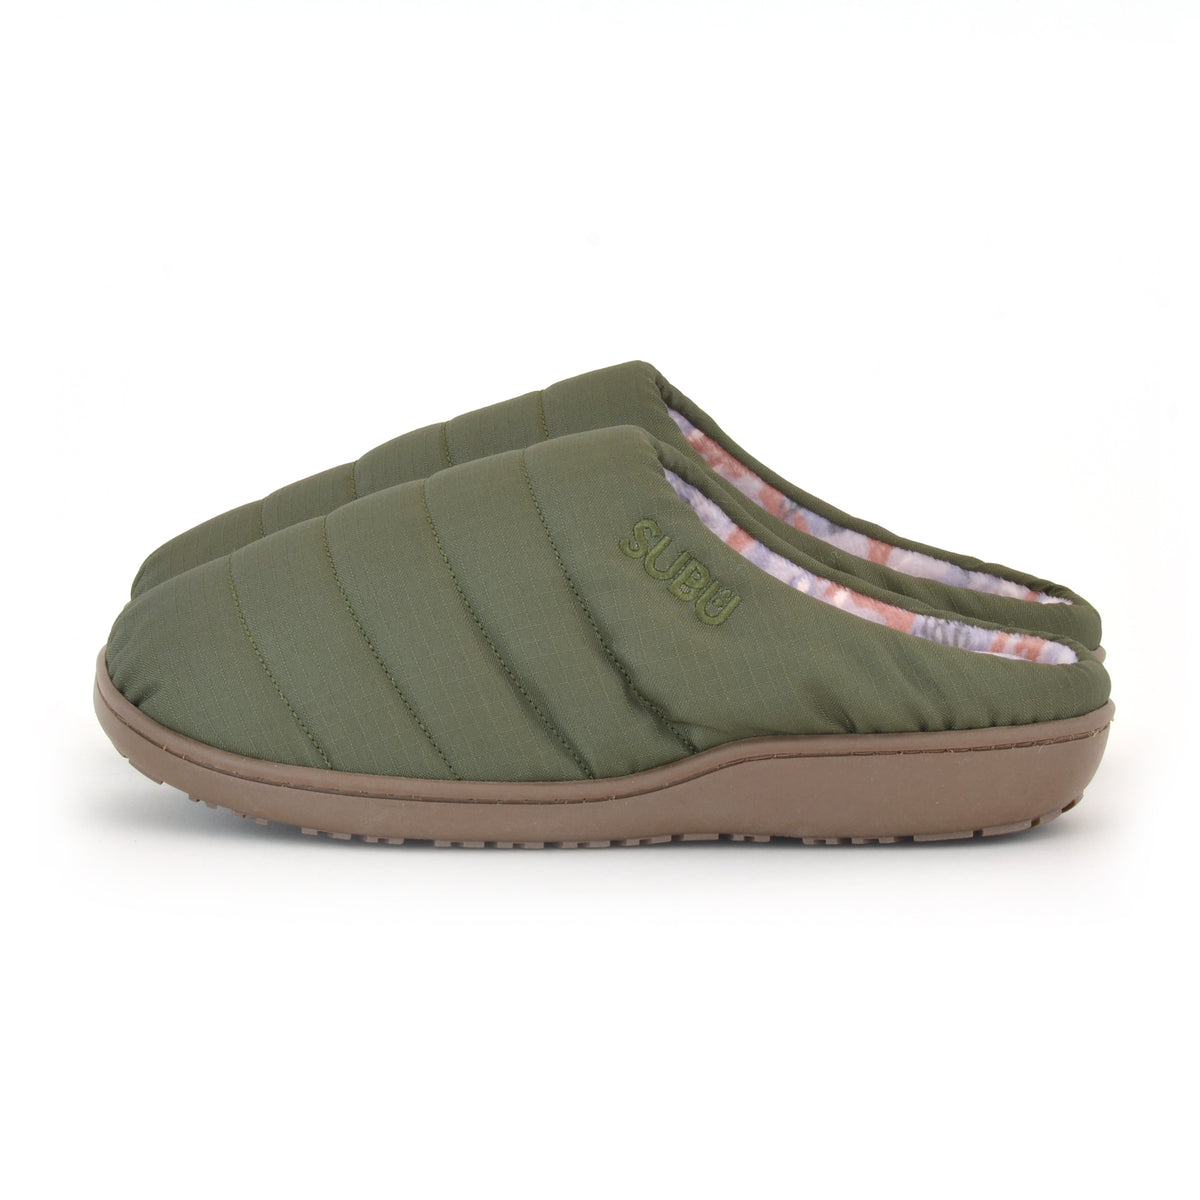 SUBU, Nannen Outdoor Slippers Olive Drab, Size, 0, Slippers,